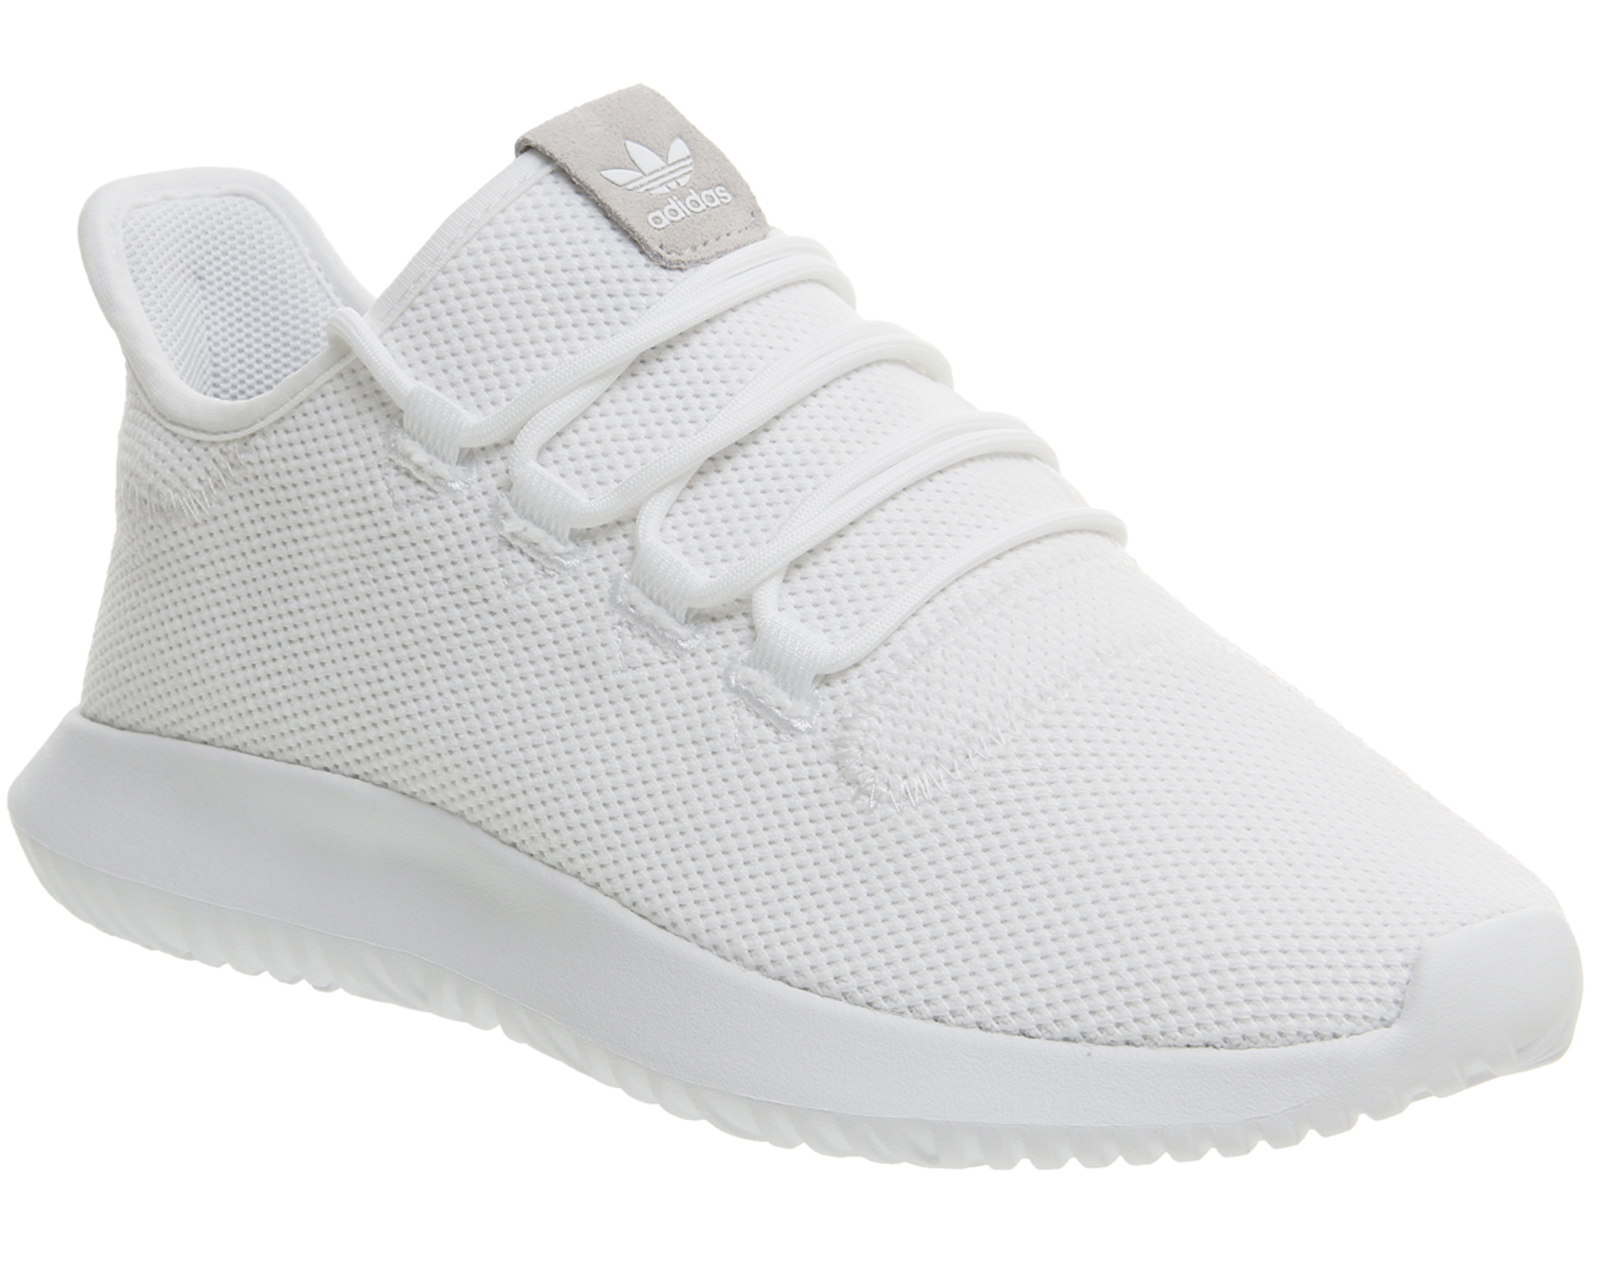 tubular shadow shoes white cheap online